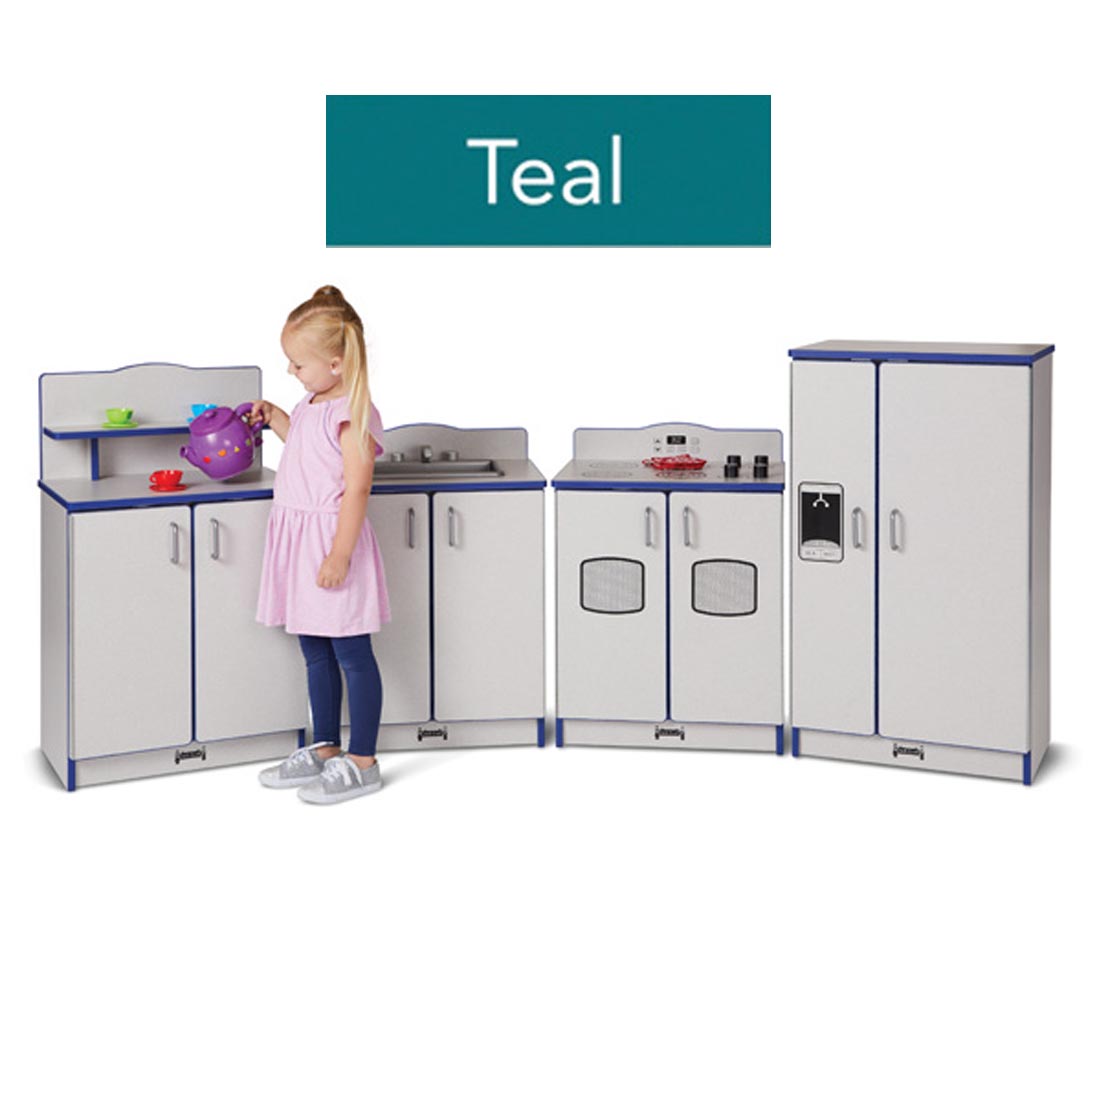 Child pouring tea in the 4-Piece Kitchen Set with colored edges; text overly labeled Teal